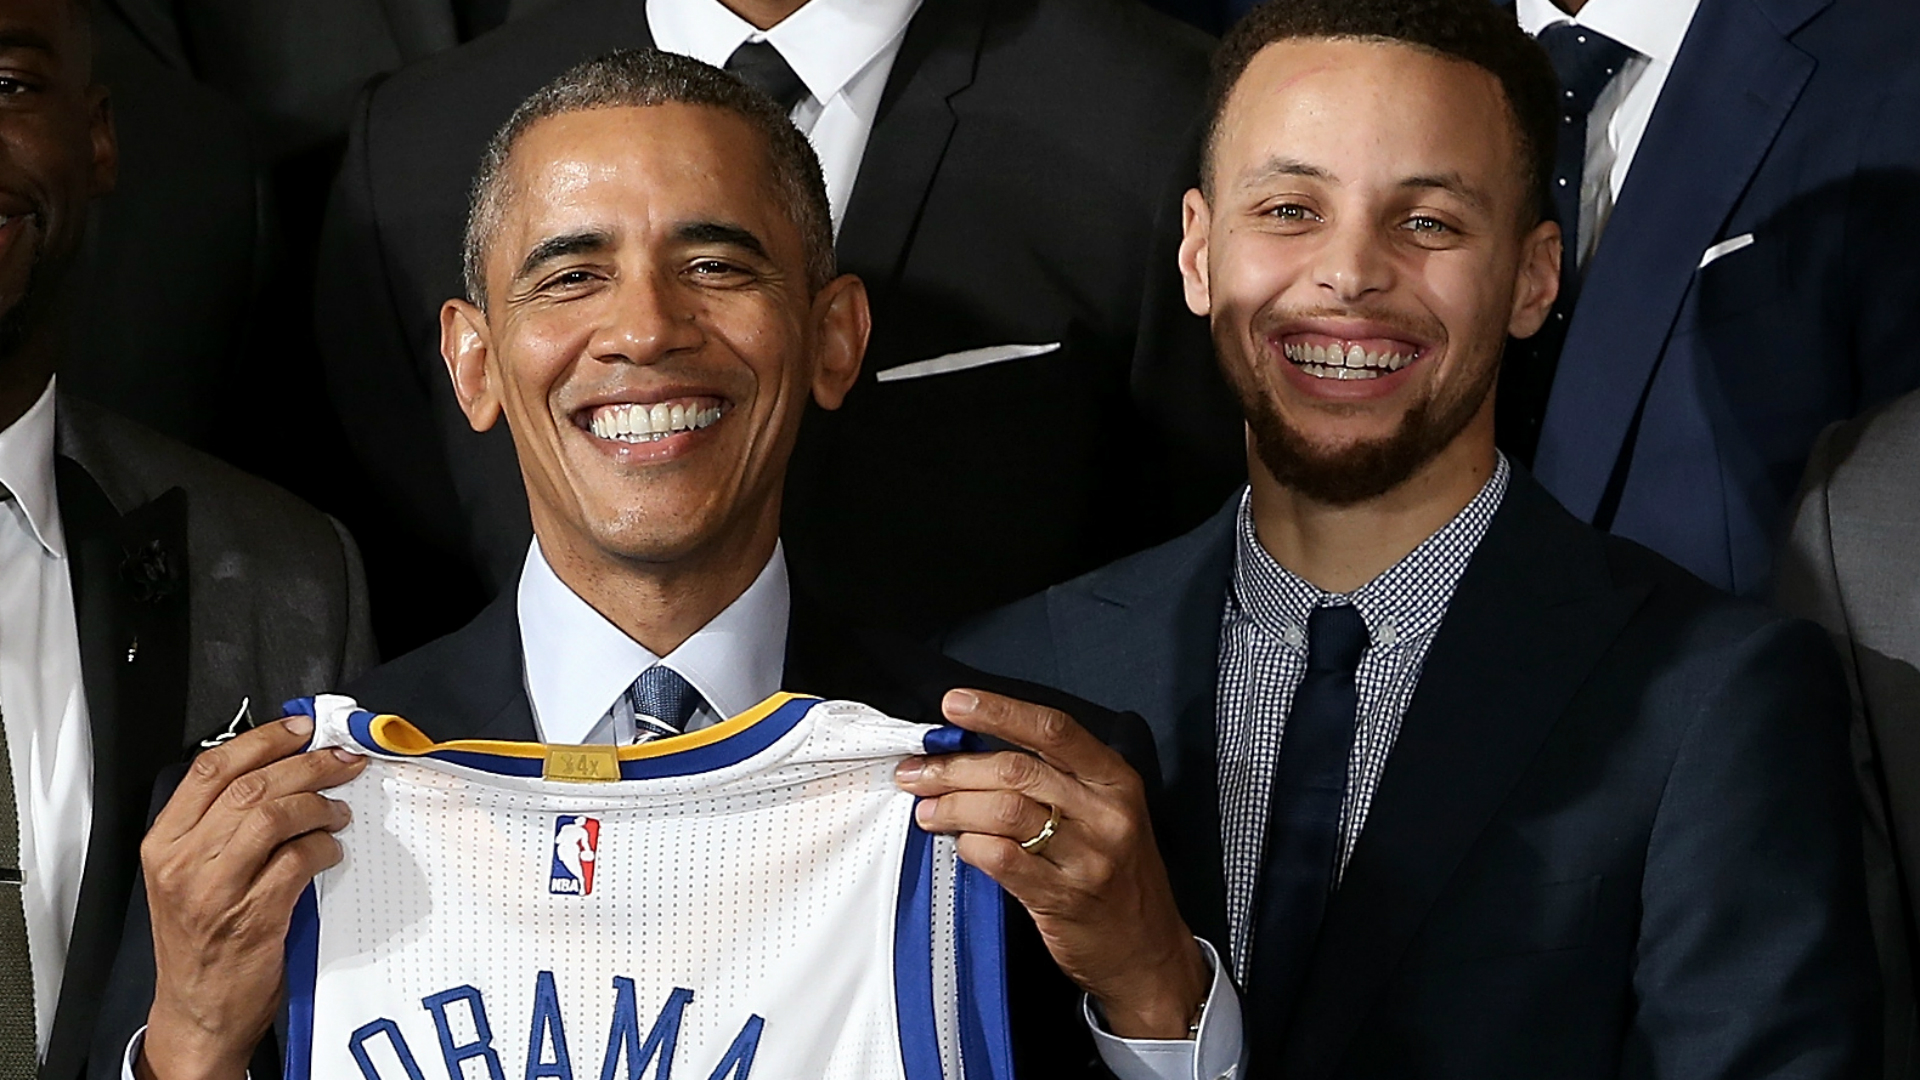 Obama Not Ready To Put Stephen Curry Above Michael Jordan